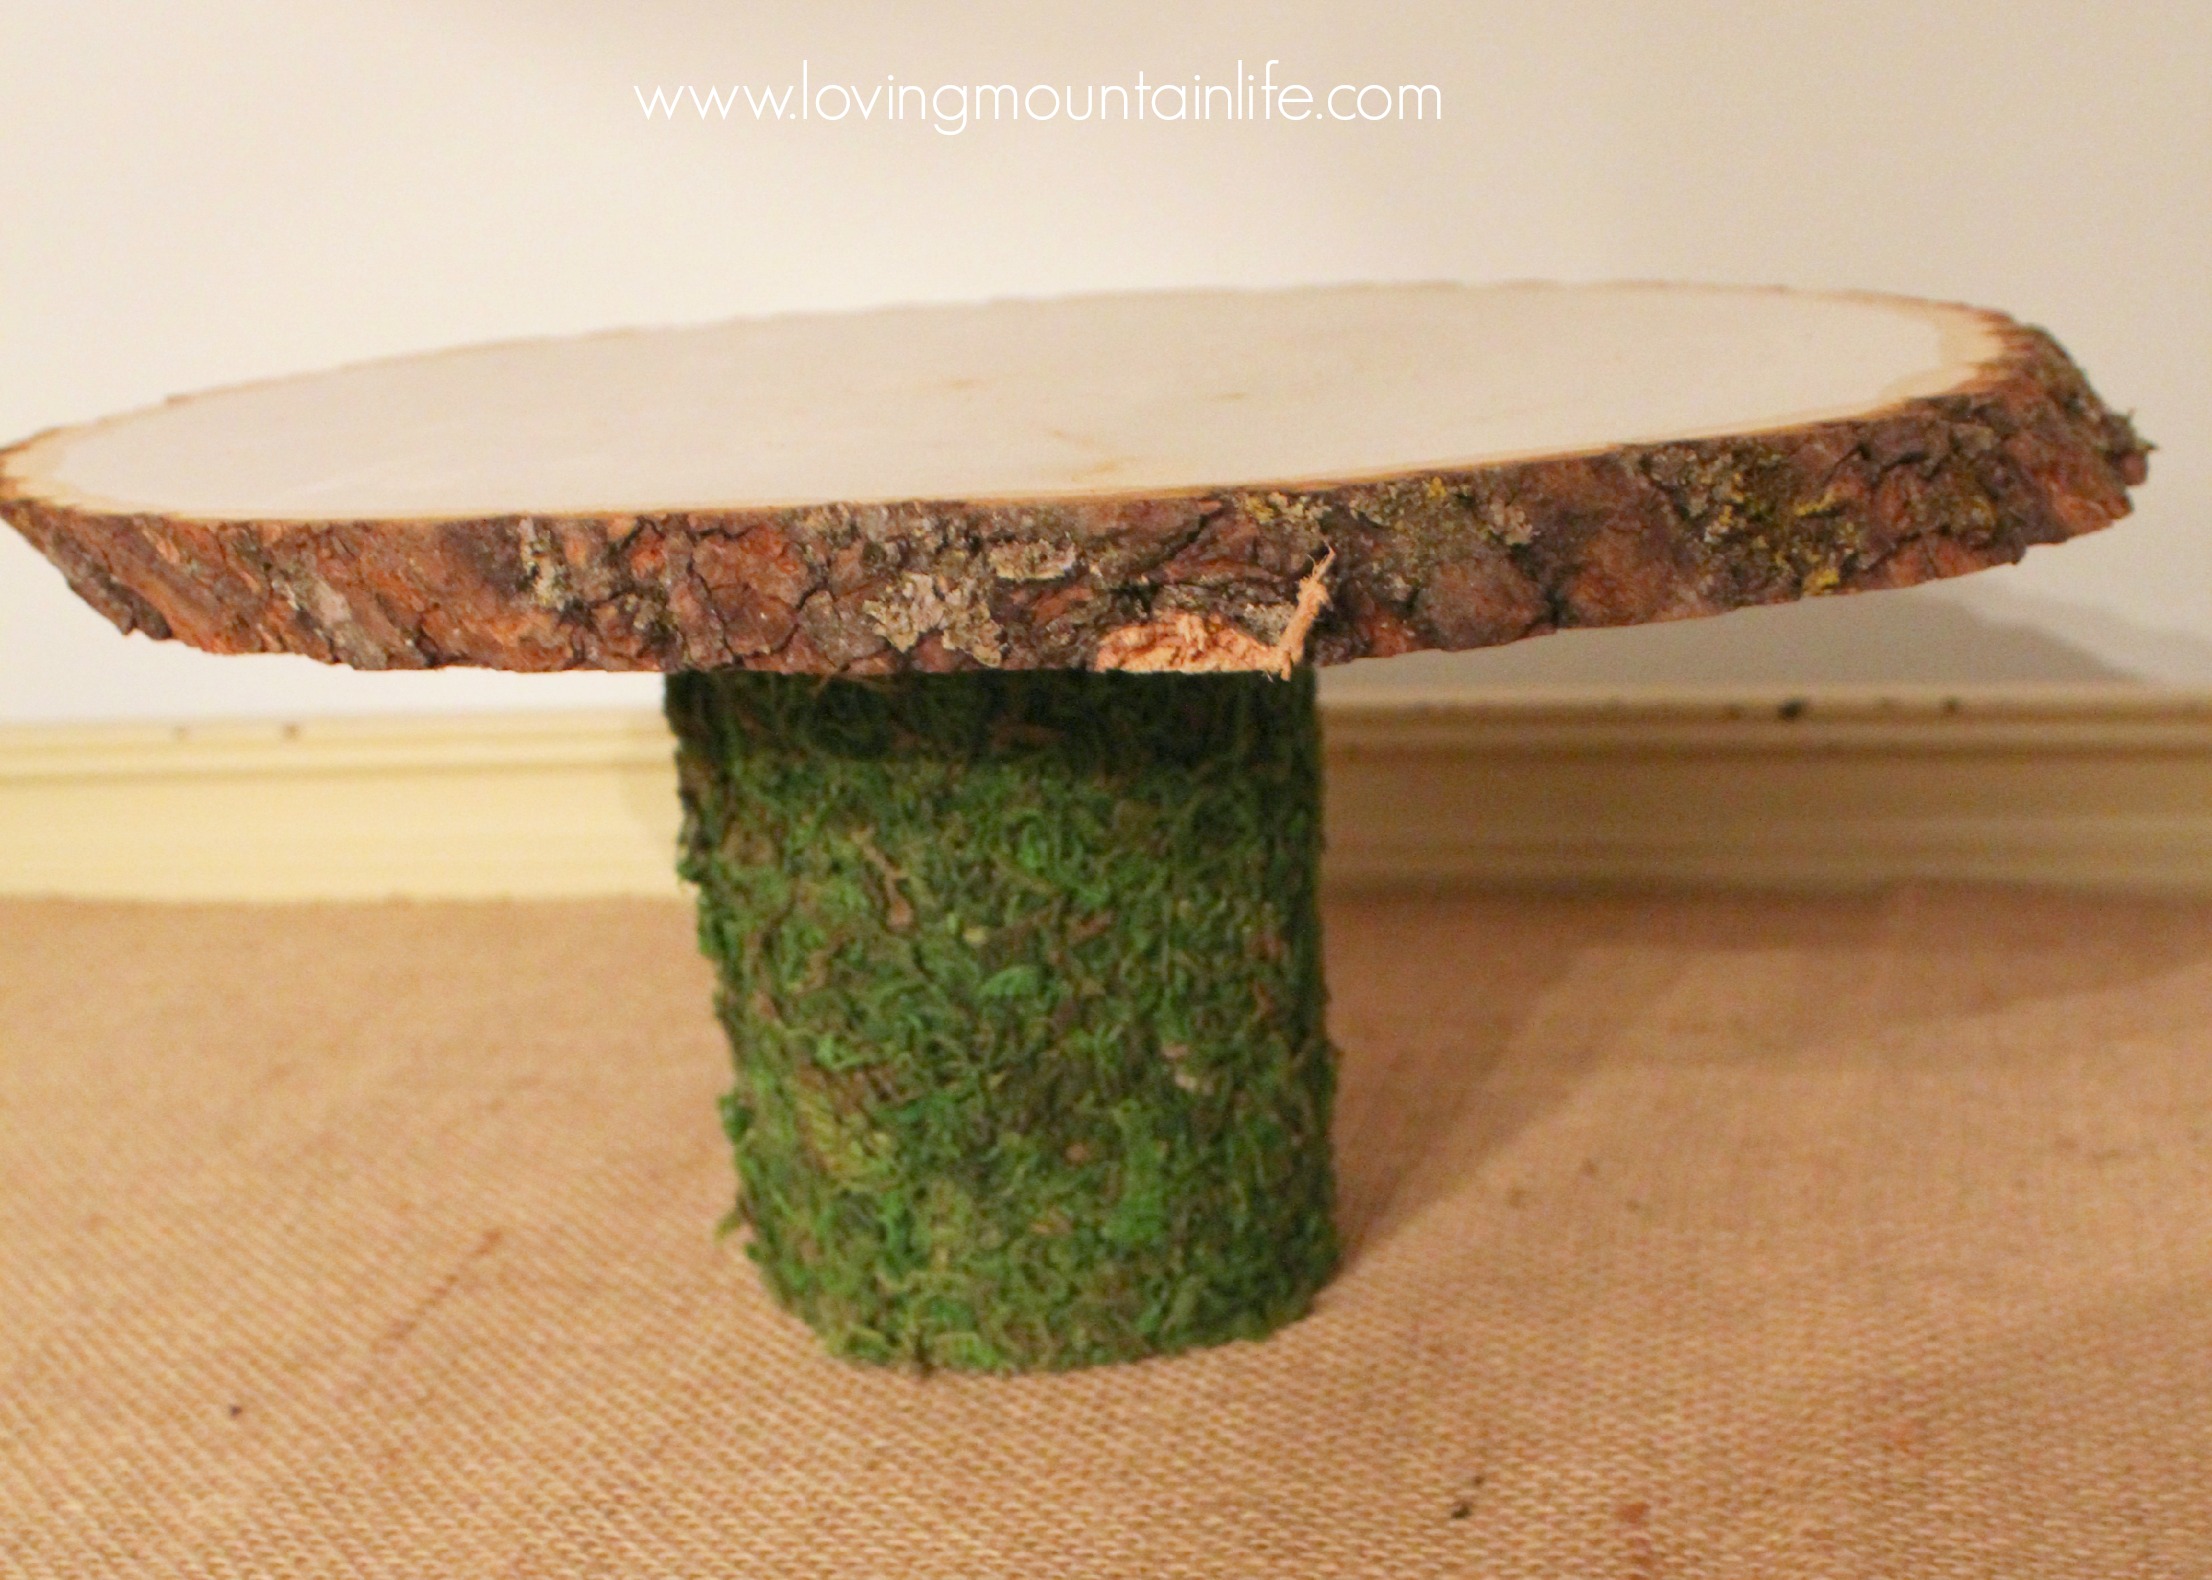 Woodland Cakestand from Loving Mountain Life